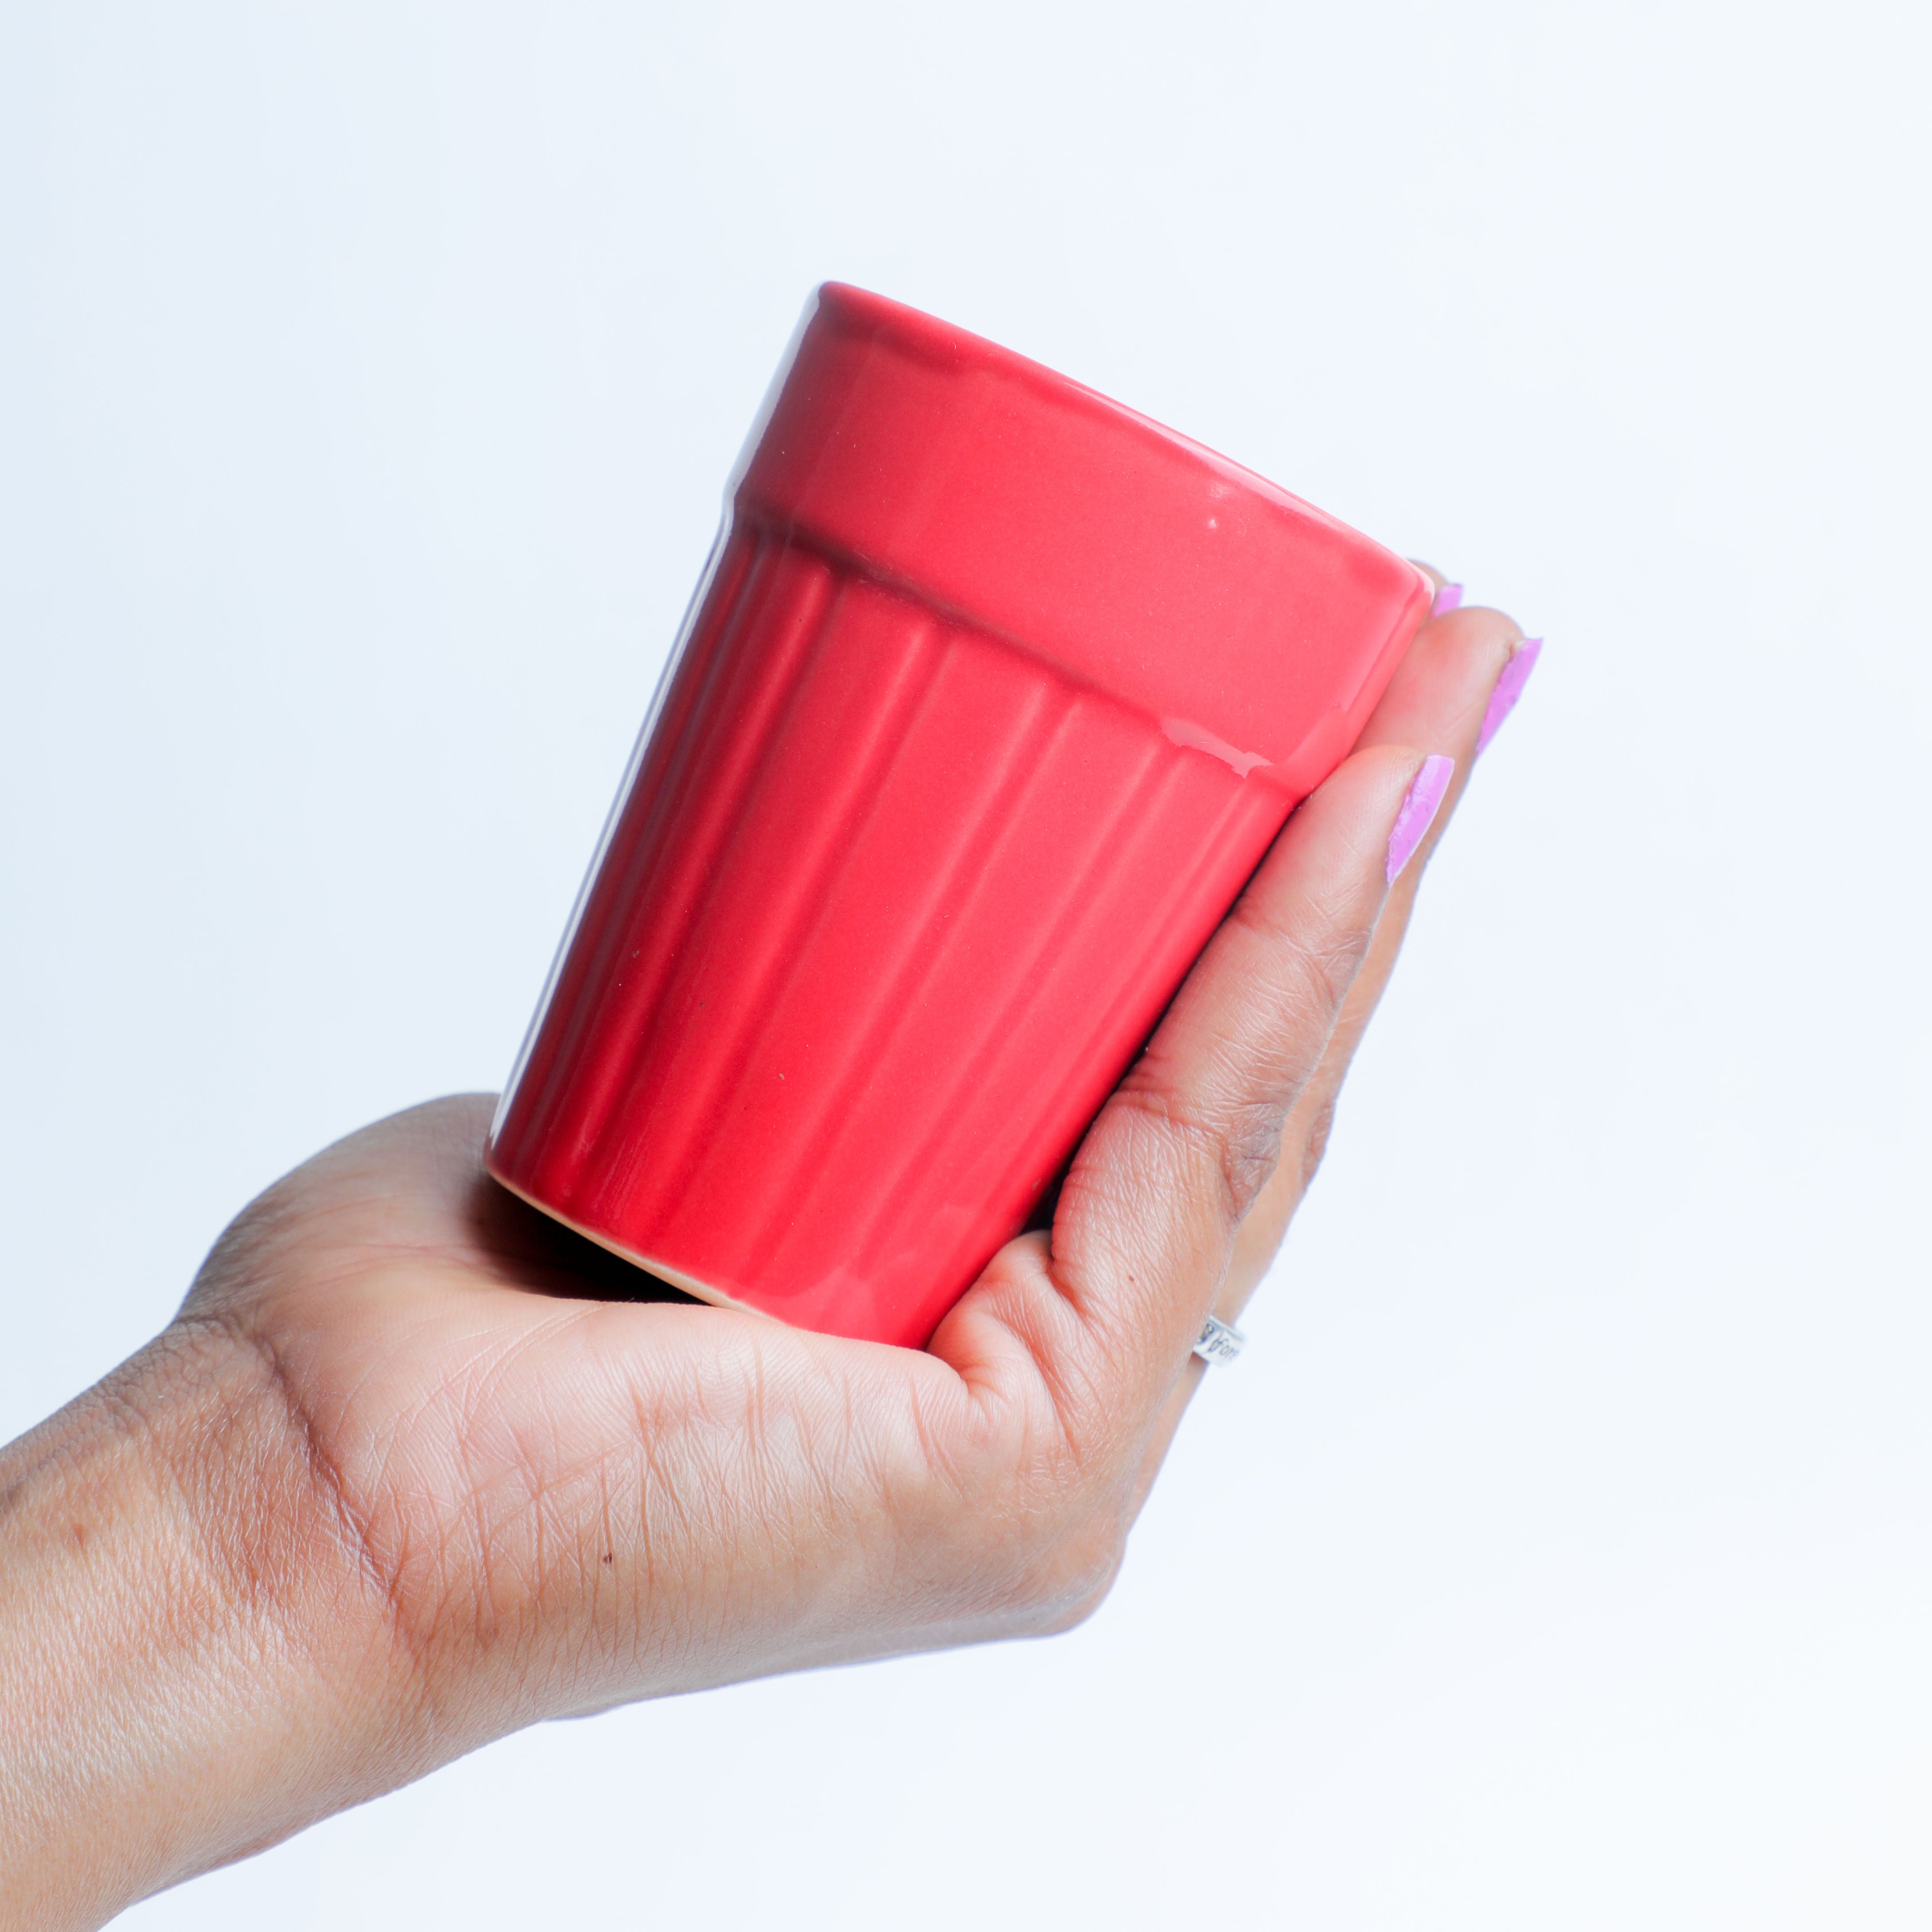 Holding the red color ceramic tea glass